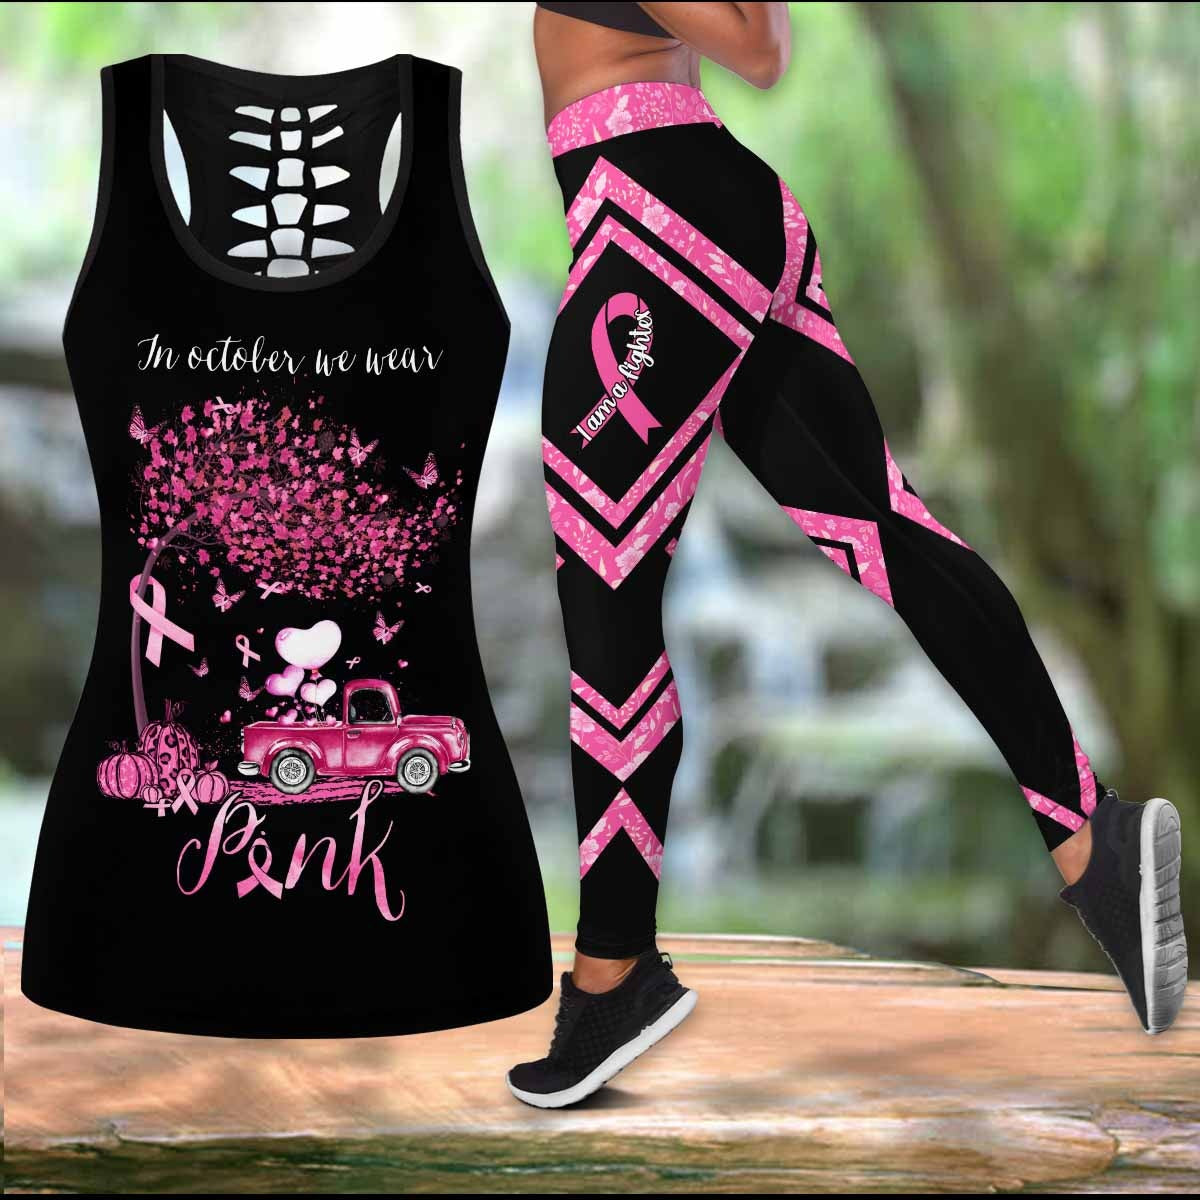 Breast Cancer In October We Wear Pink Autumn Legging Tanktop, Breast Cancer Awareness Legging Tanktop